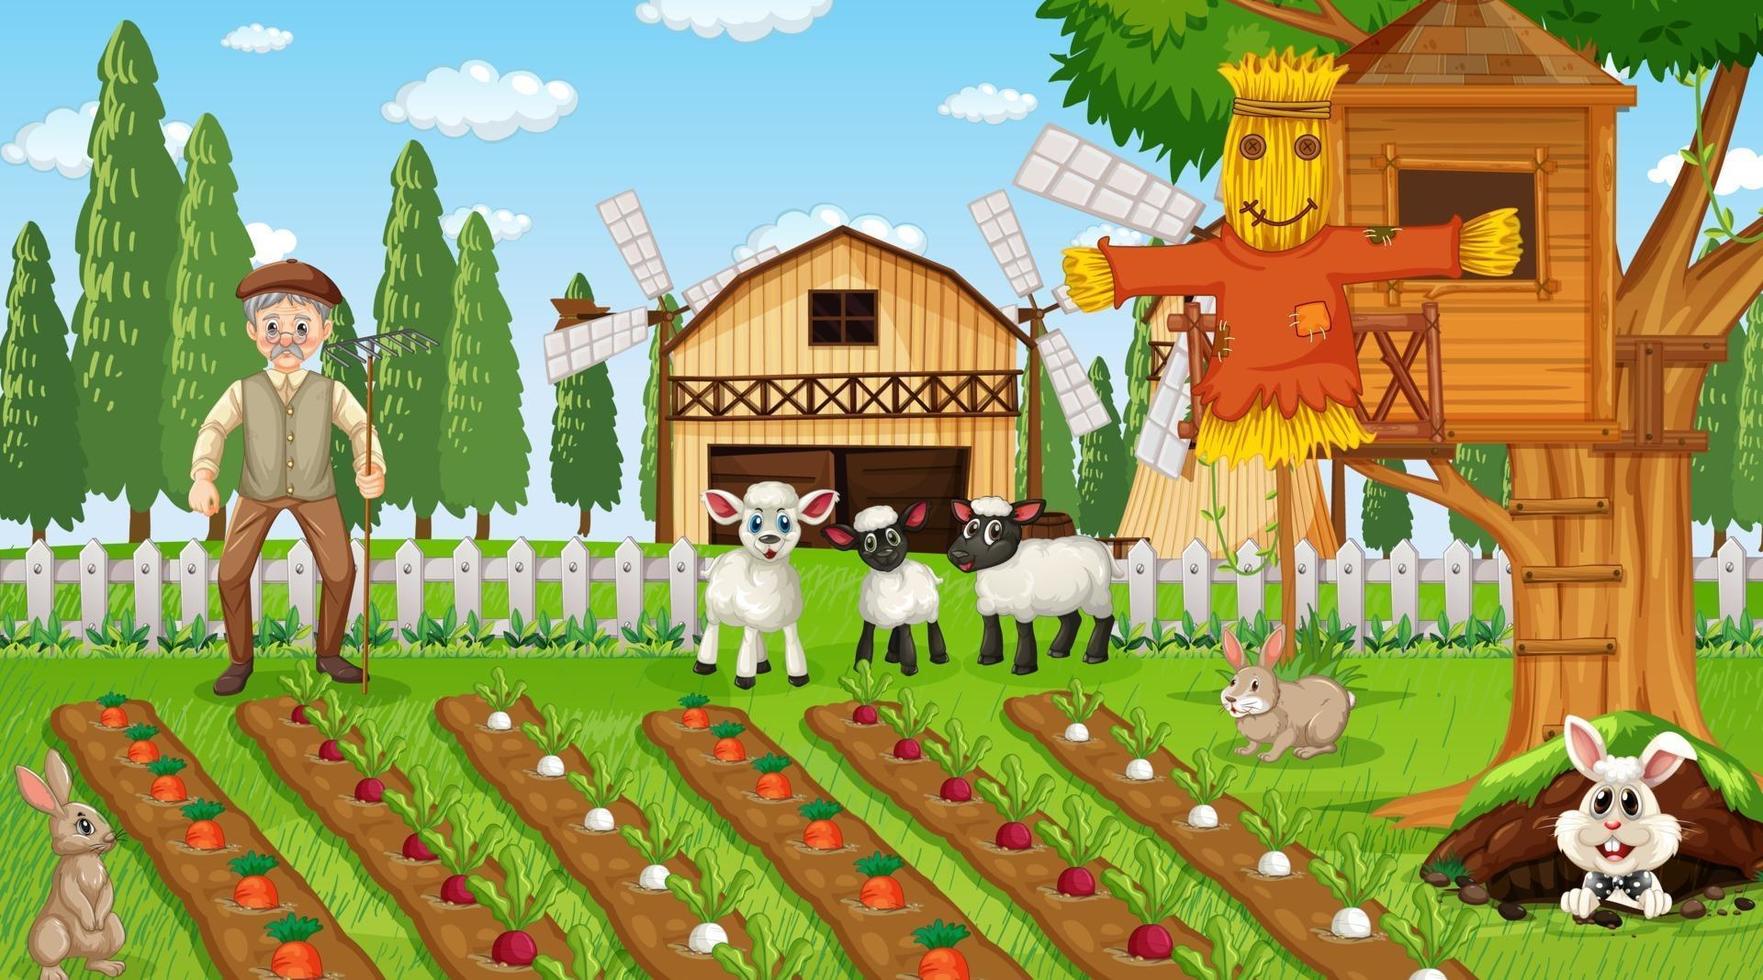 Farm scene at daytime with old farmer man and cute animals vector